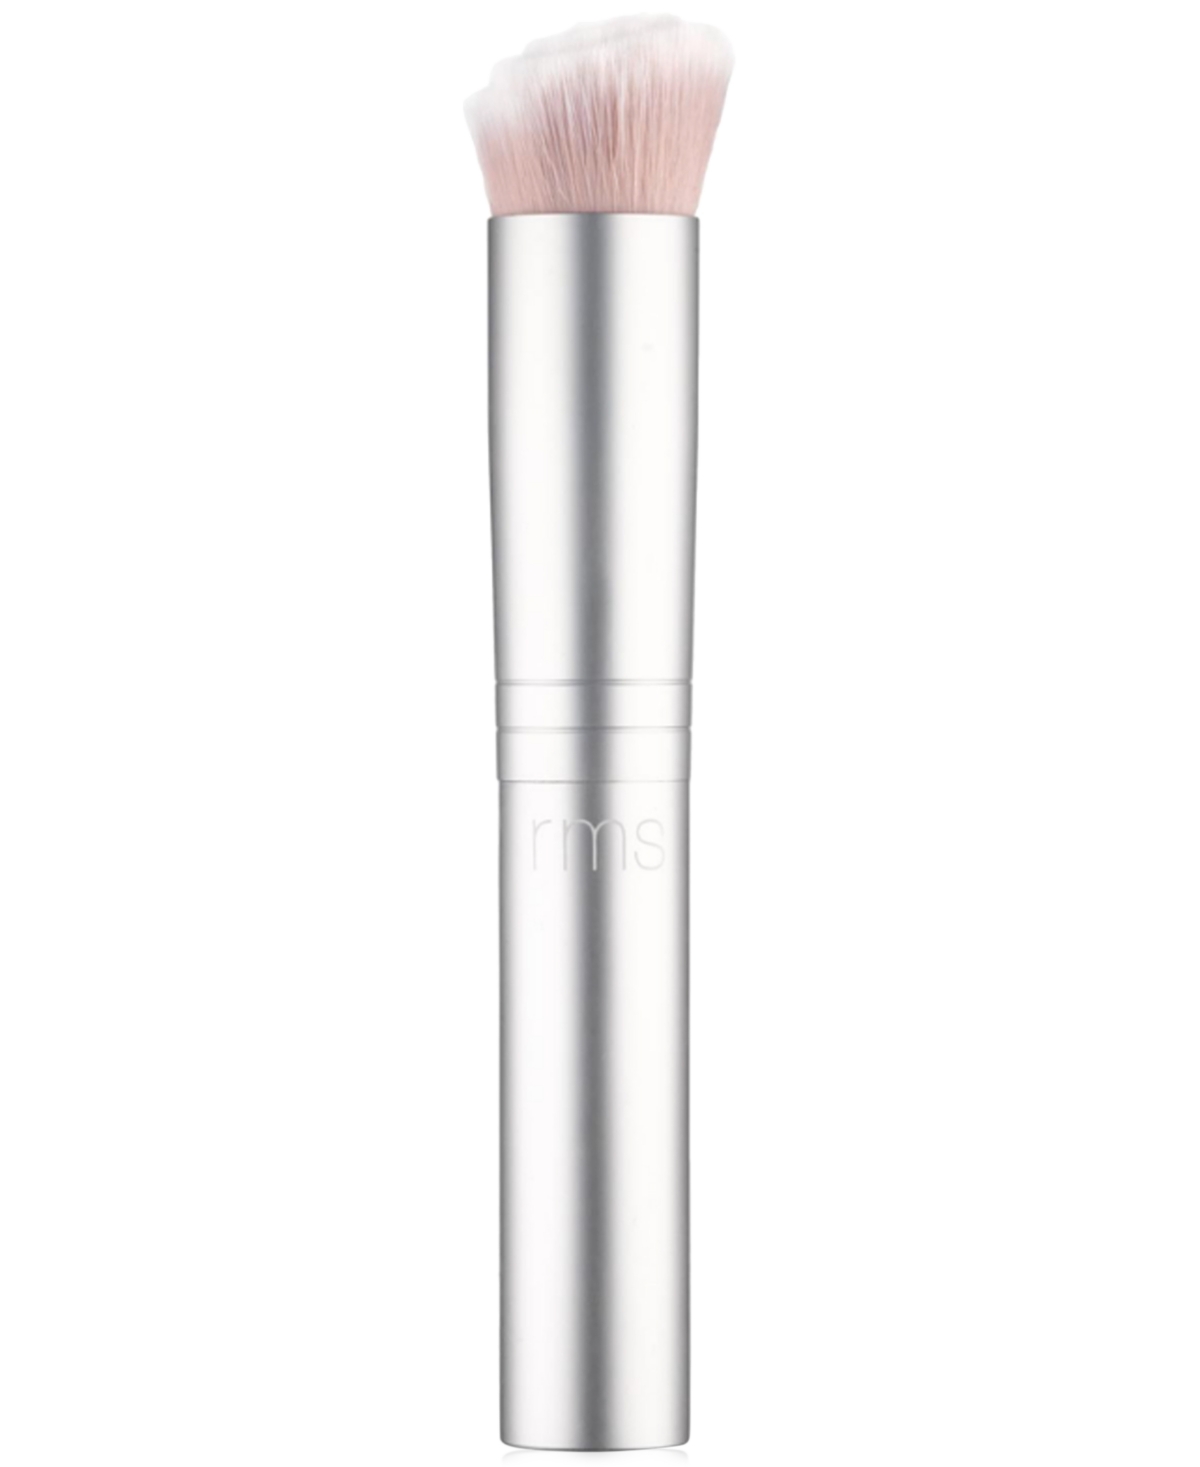 Rms Beauty Skin2skin Foundation Brush In No Color